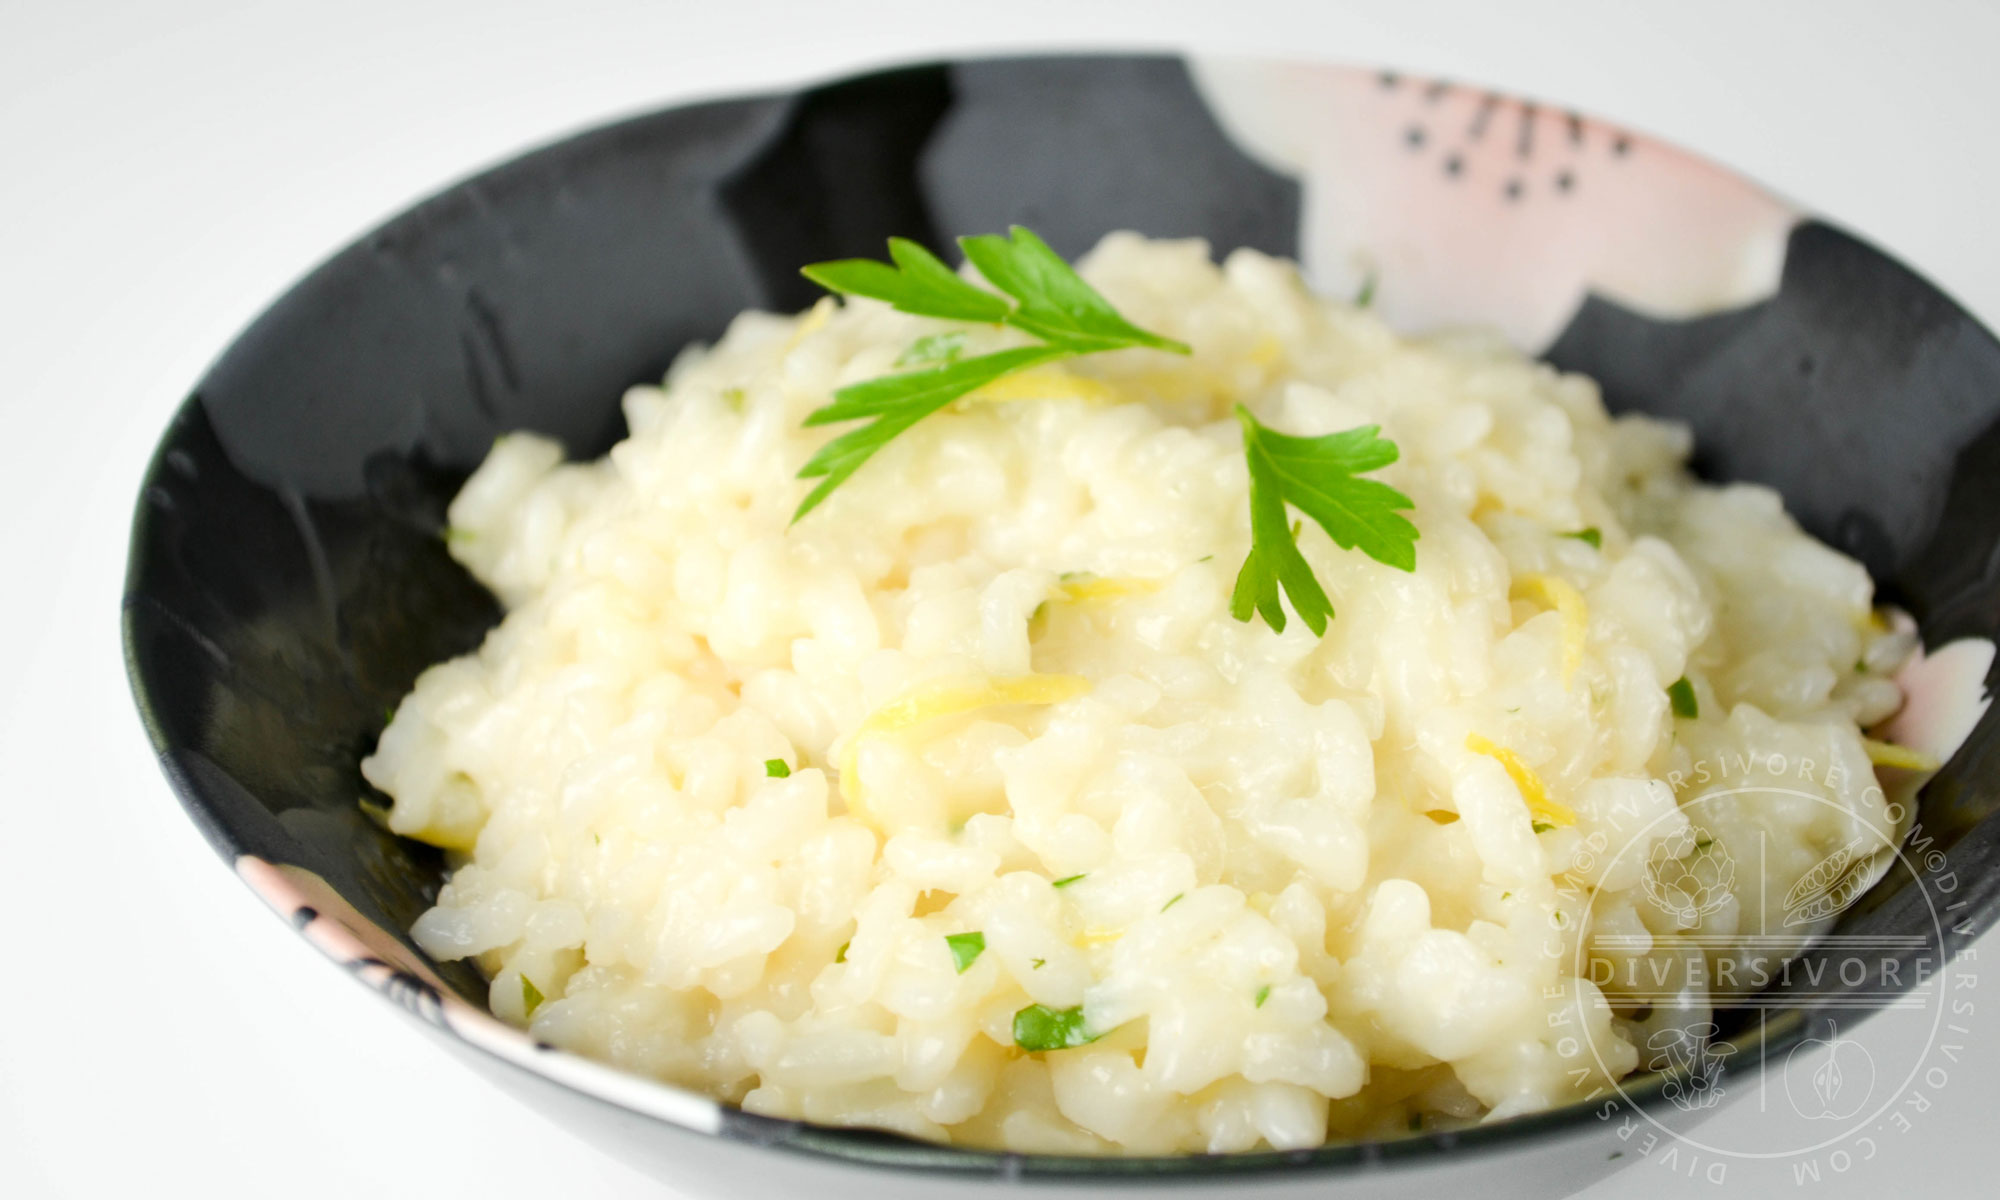 Japanese Lemon Herb Risotto in a decorative floral bowl